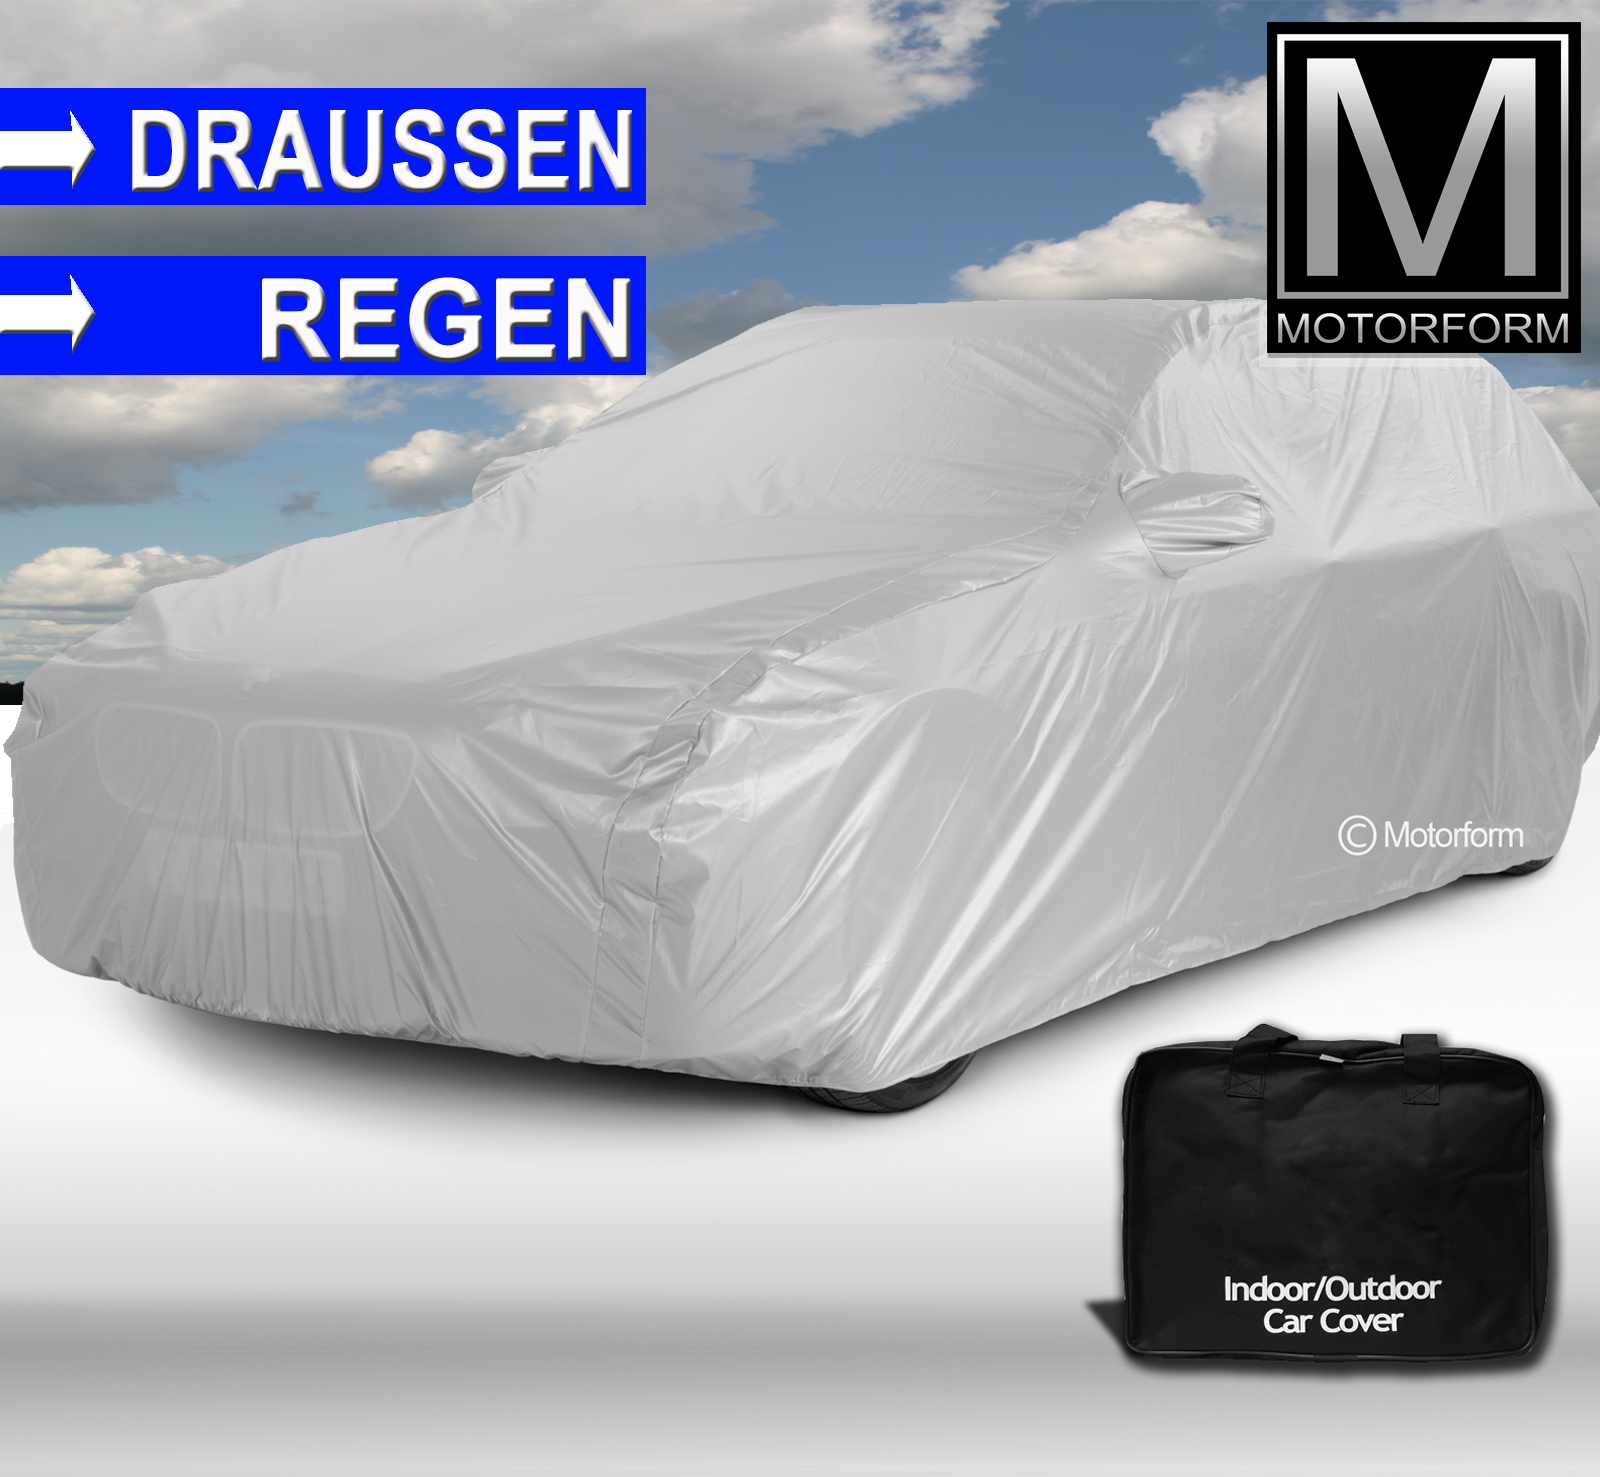 Voyager Outdoor Car Cover for BMW 3 Series F31 Touring